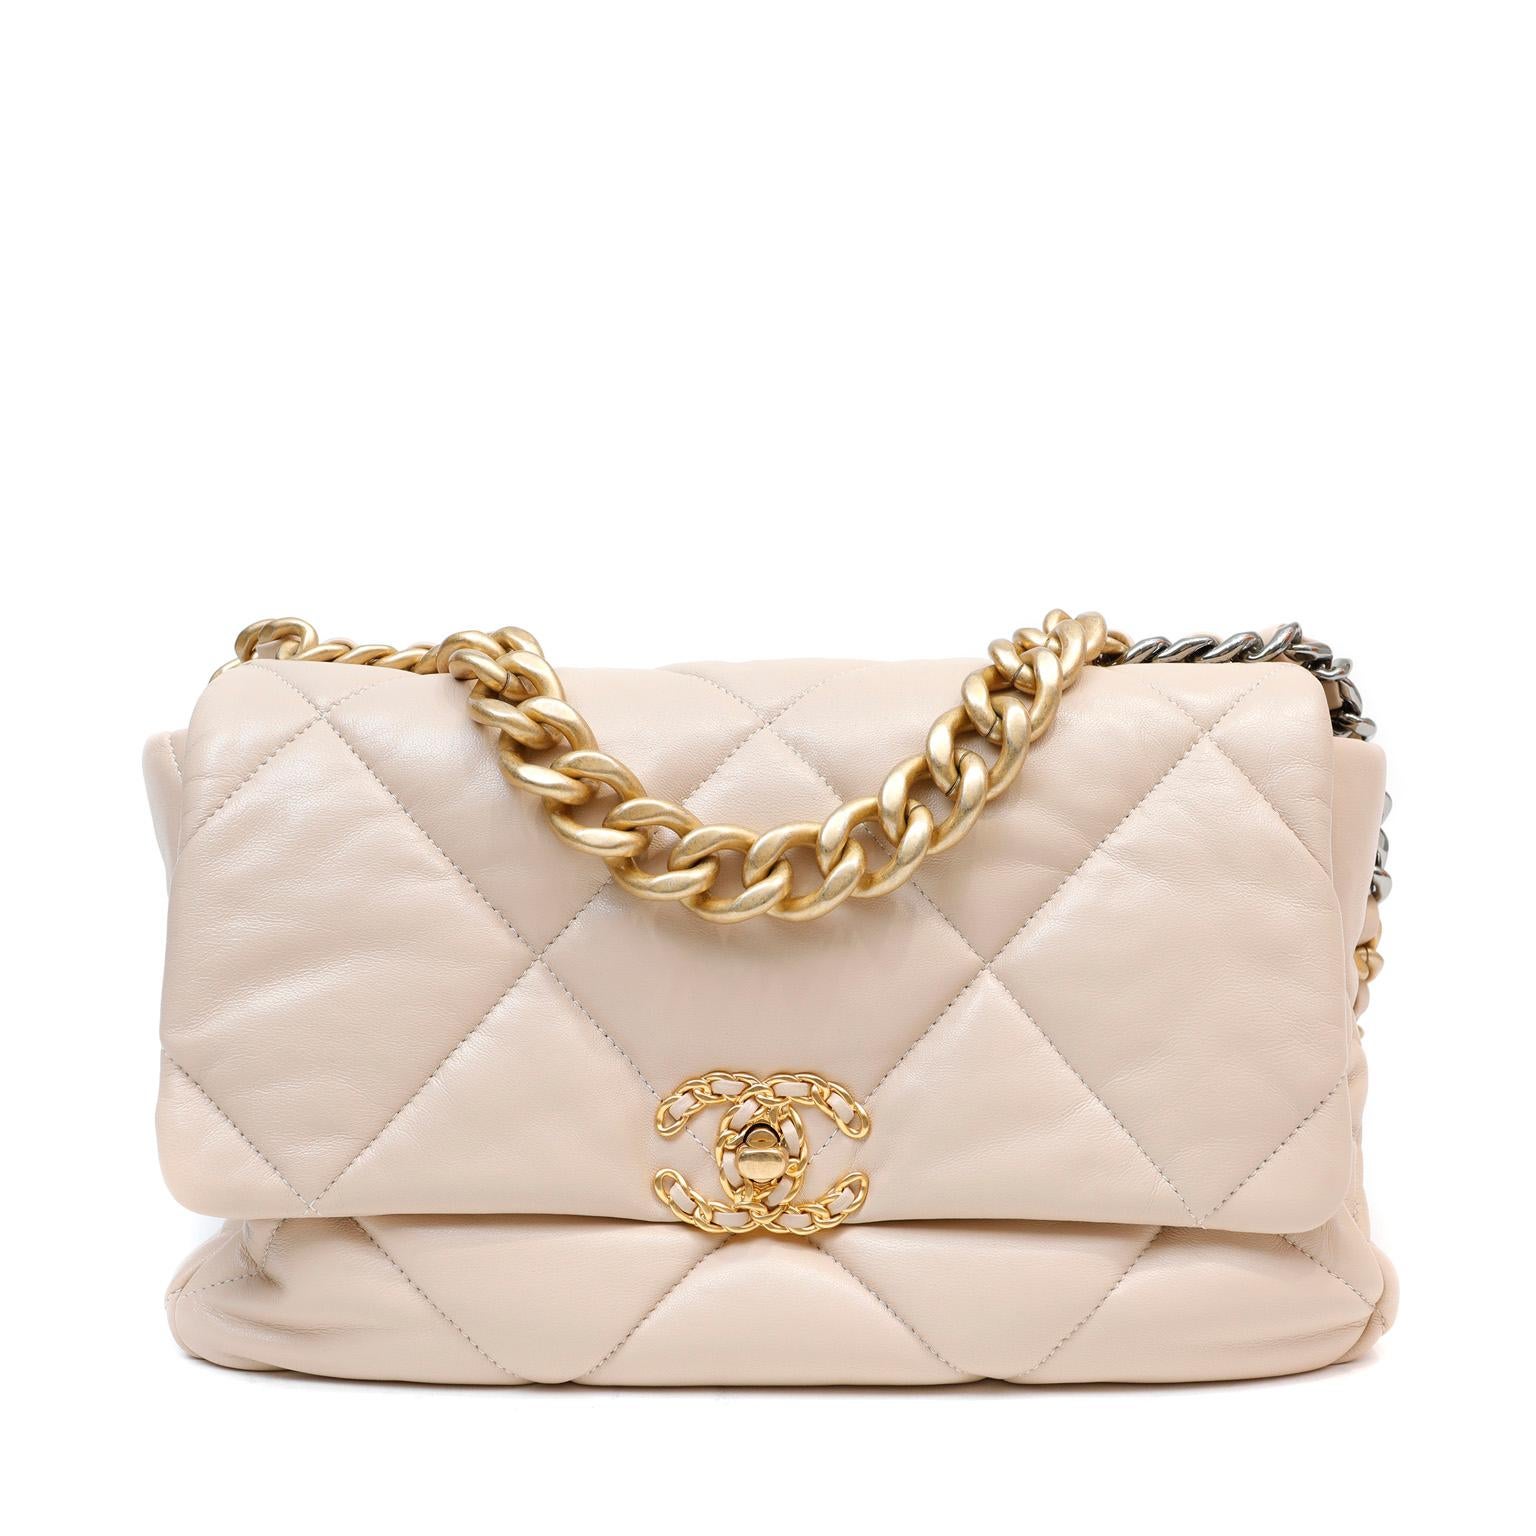 This authentic Chanel Beige Lambskin 19 Bag is in pristine unworn condition.  Released in 2019, the pillowy soft oversized quilts and mixed metals are a beautiful addition to the classic flap family.  Neutral beige lambskin is quilted in signature